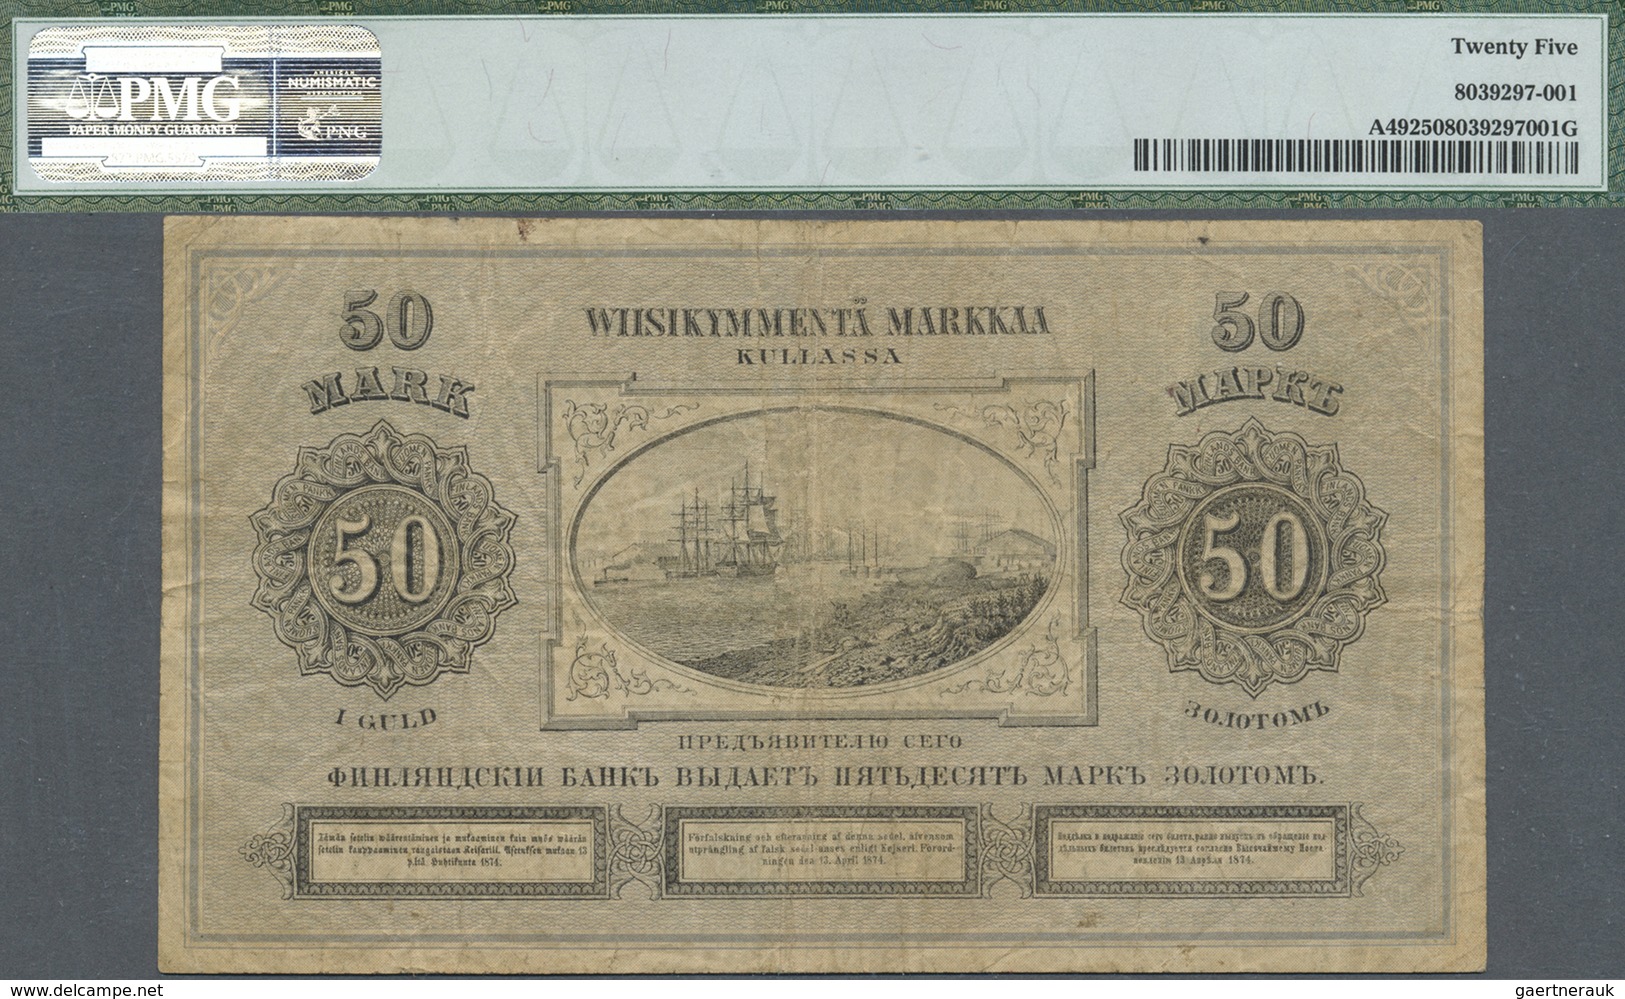 Finland / Finnland: 50 Markkaa 1884, P.A49, Highly Rare Note In Great Original Shape With Lightly To - Finnland